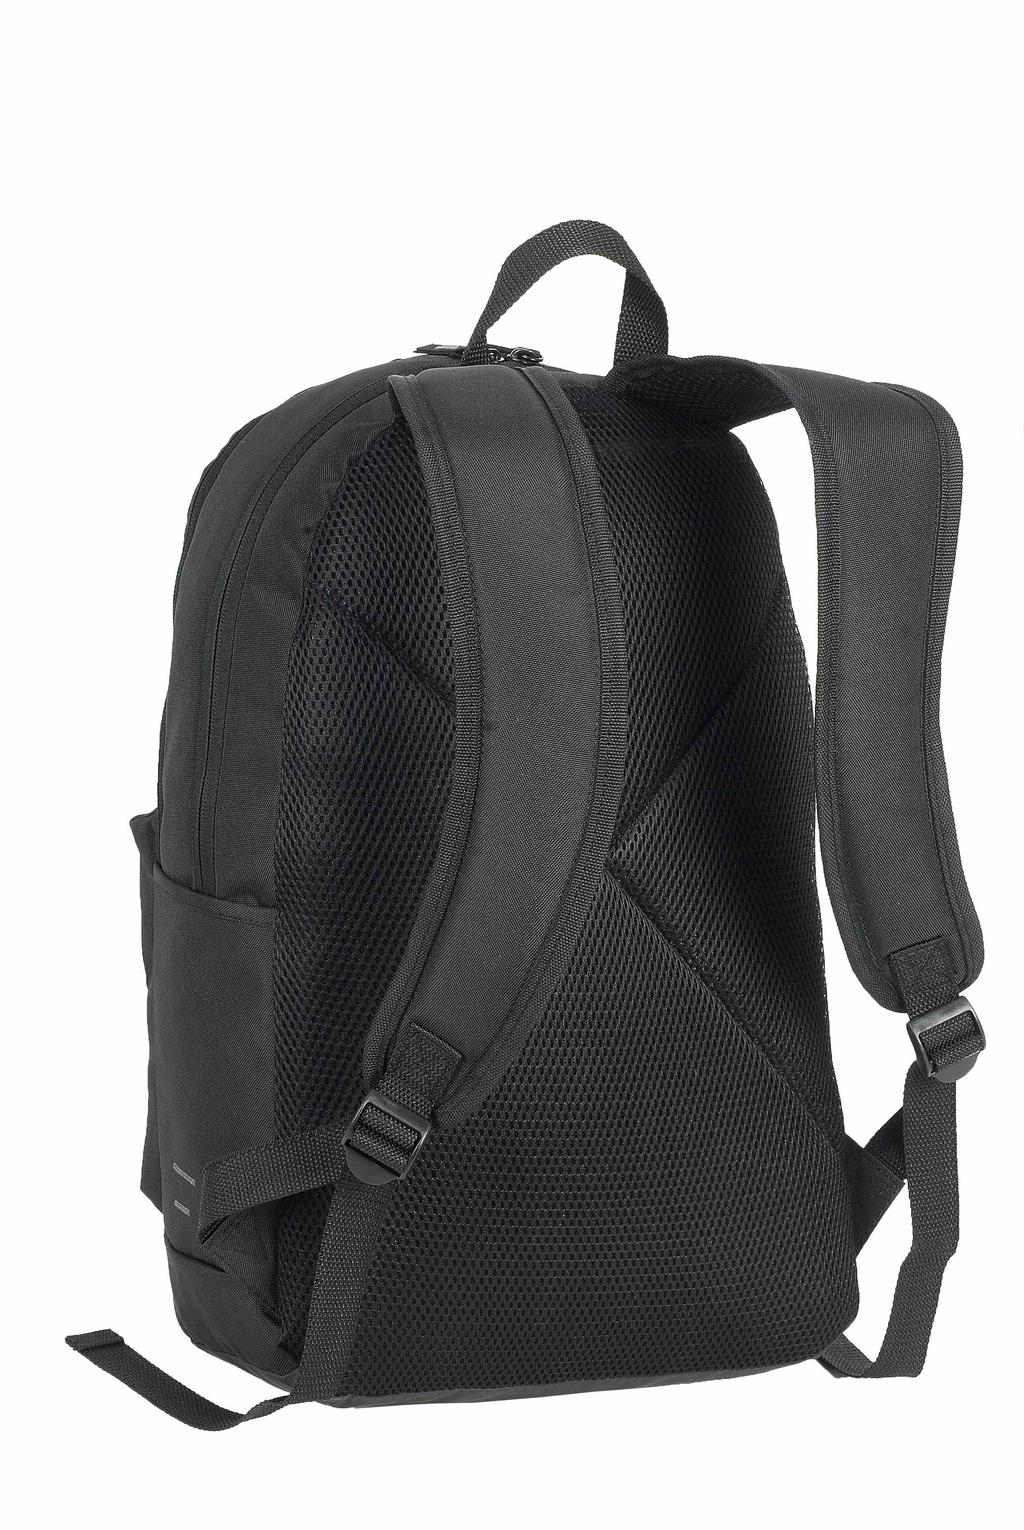  Plymouth Students Backpack in Farbe Black